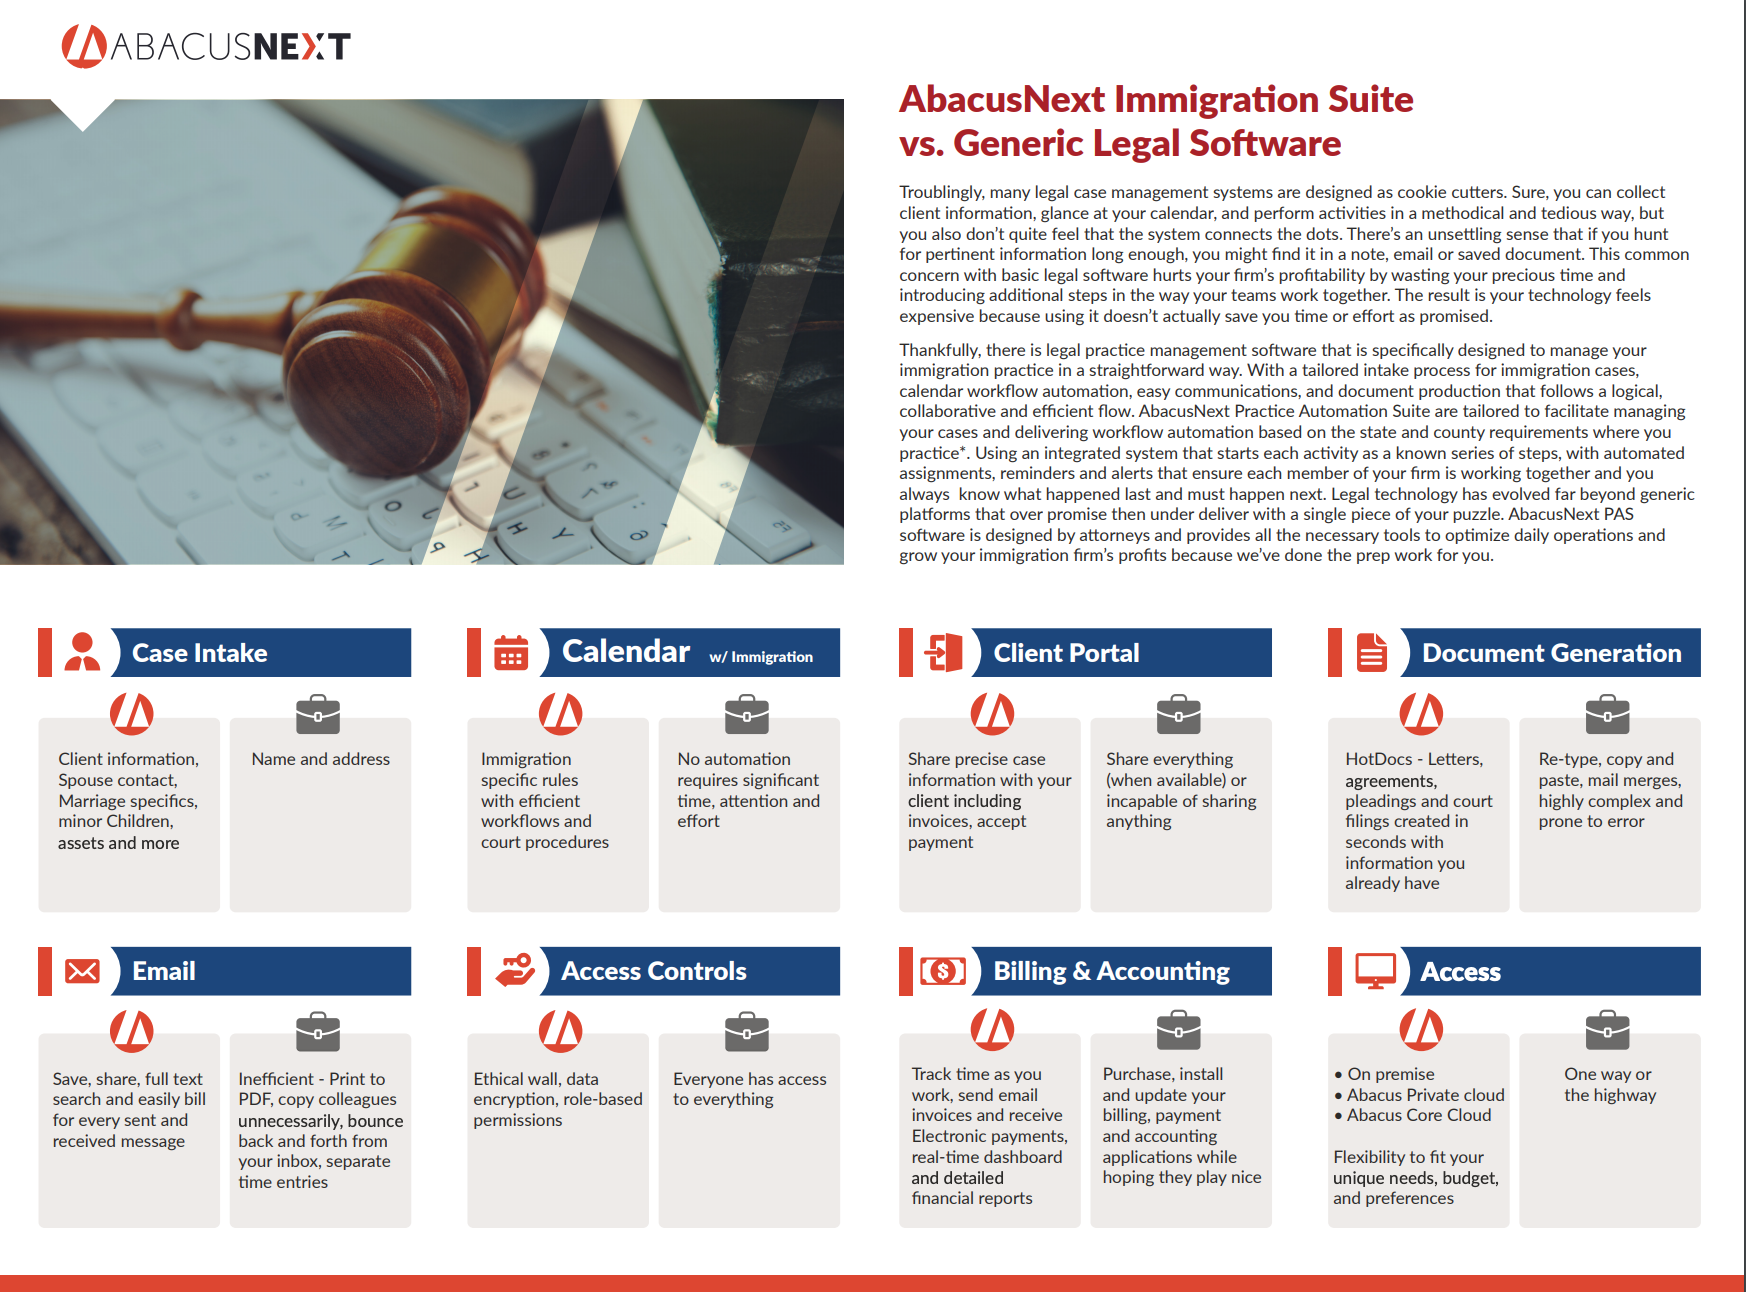 Image of AbacusNext Immigration Software Comparison